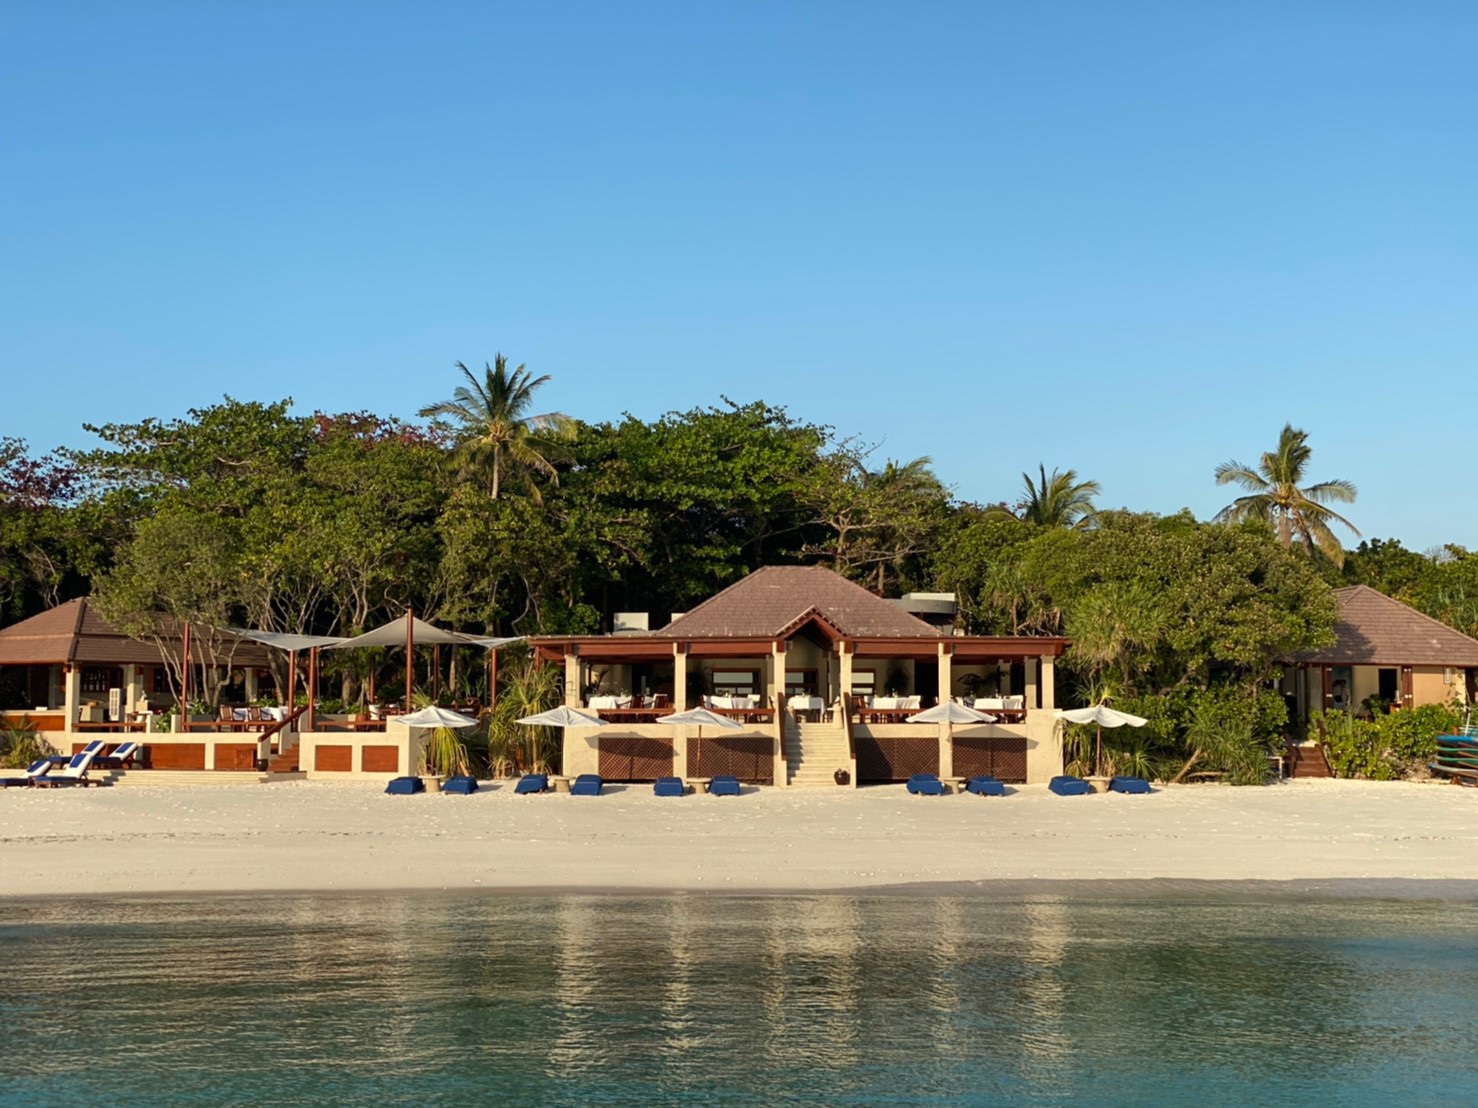 8 Airbnbs and Private Island Resorts in the Philippines - Amanpulo